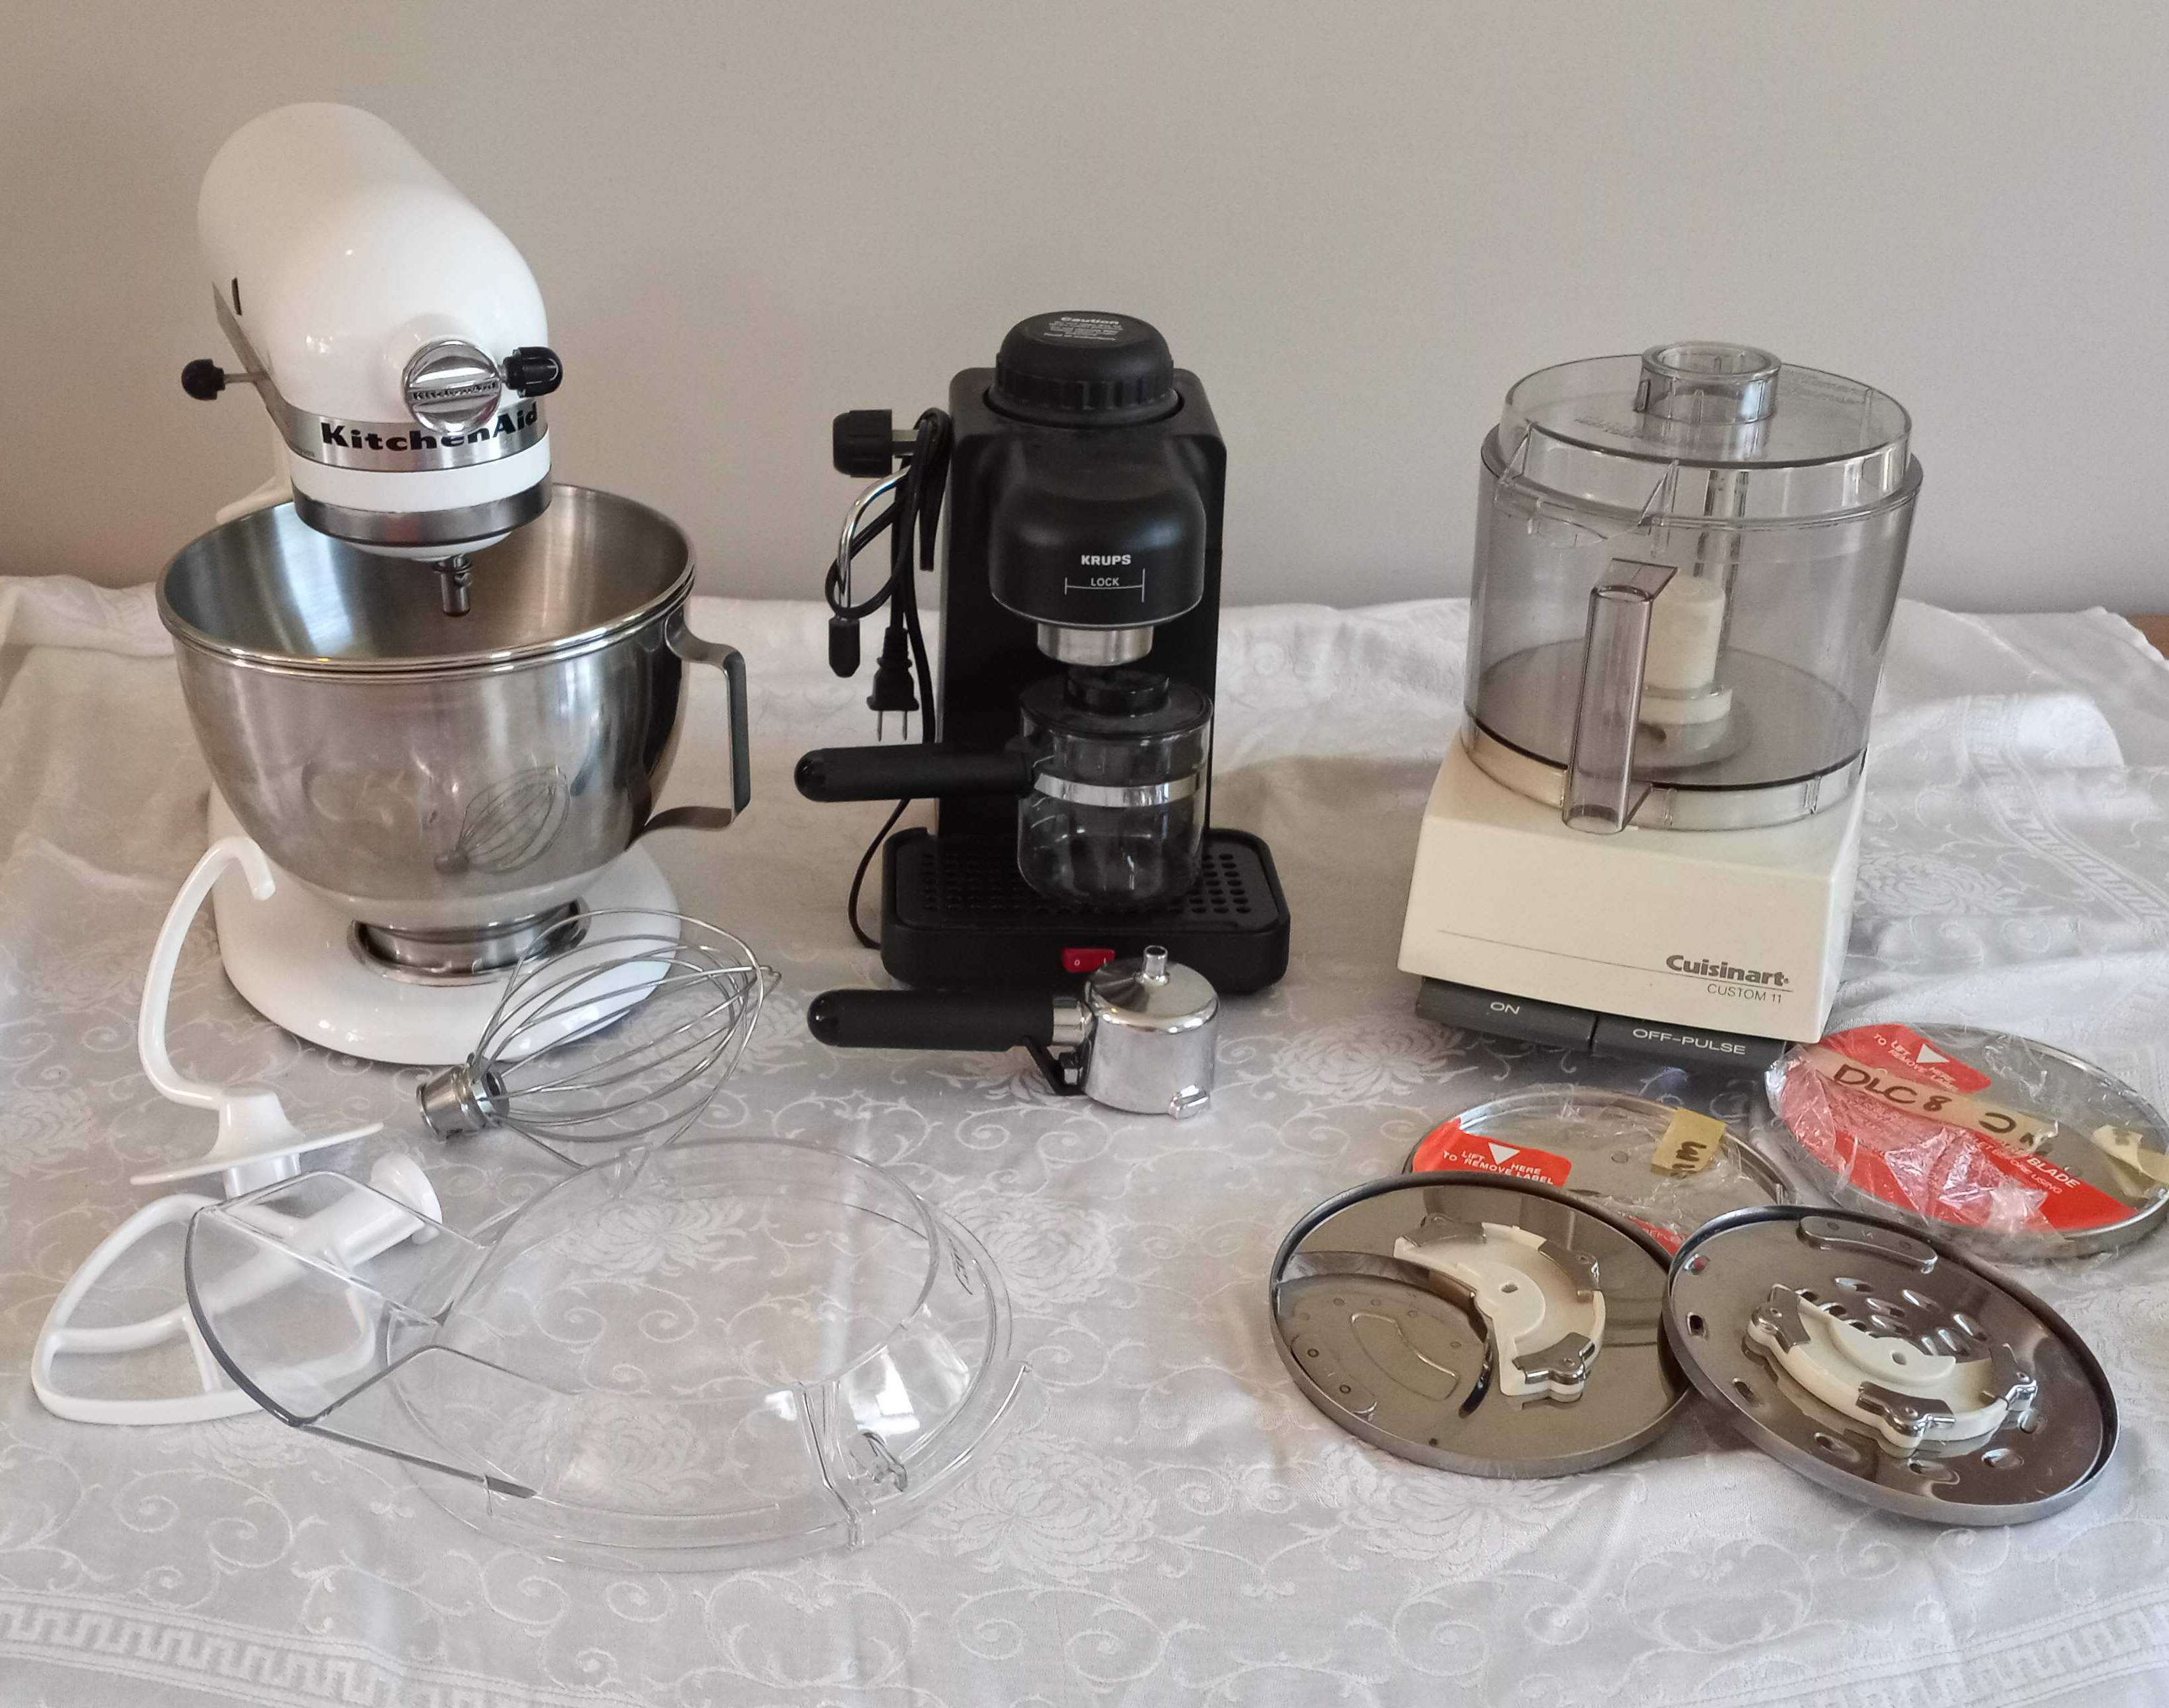 KitchenAid Mixer Attachments for sale in Scaly Mountain, North